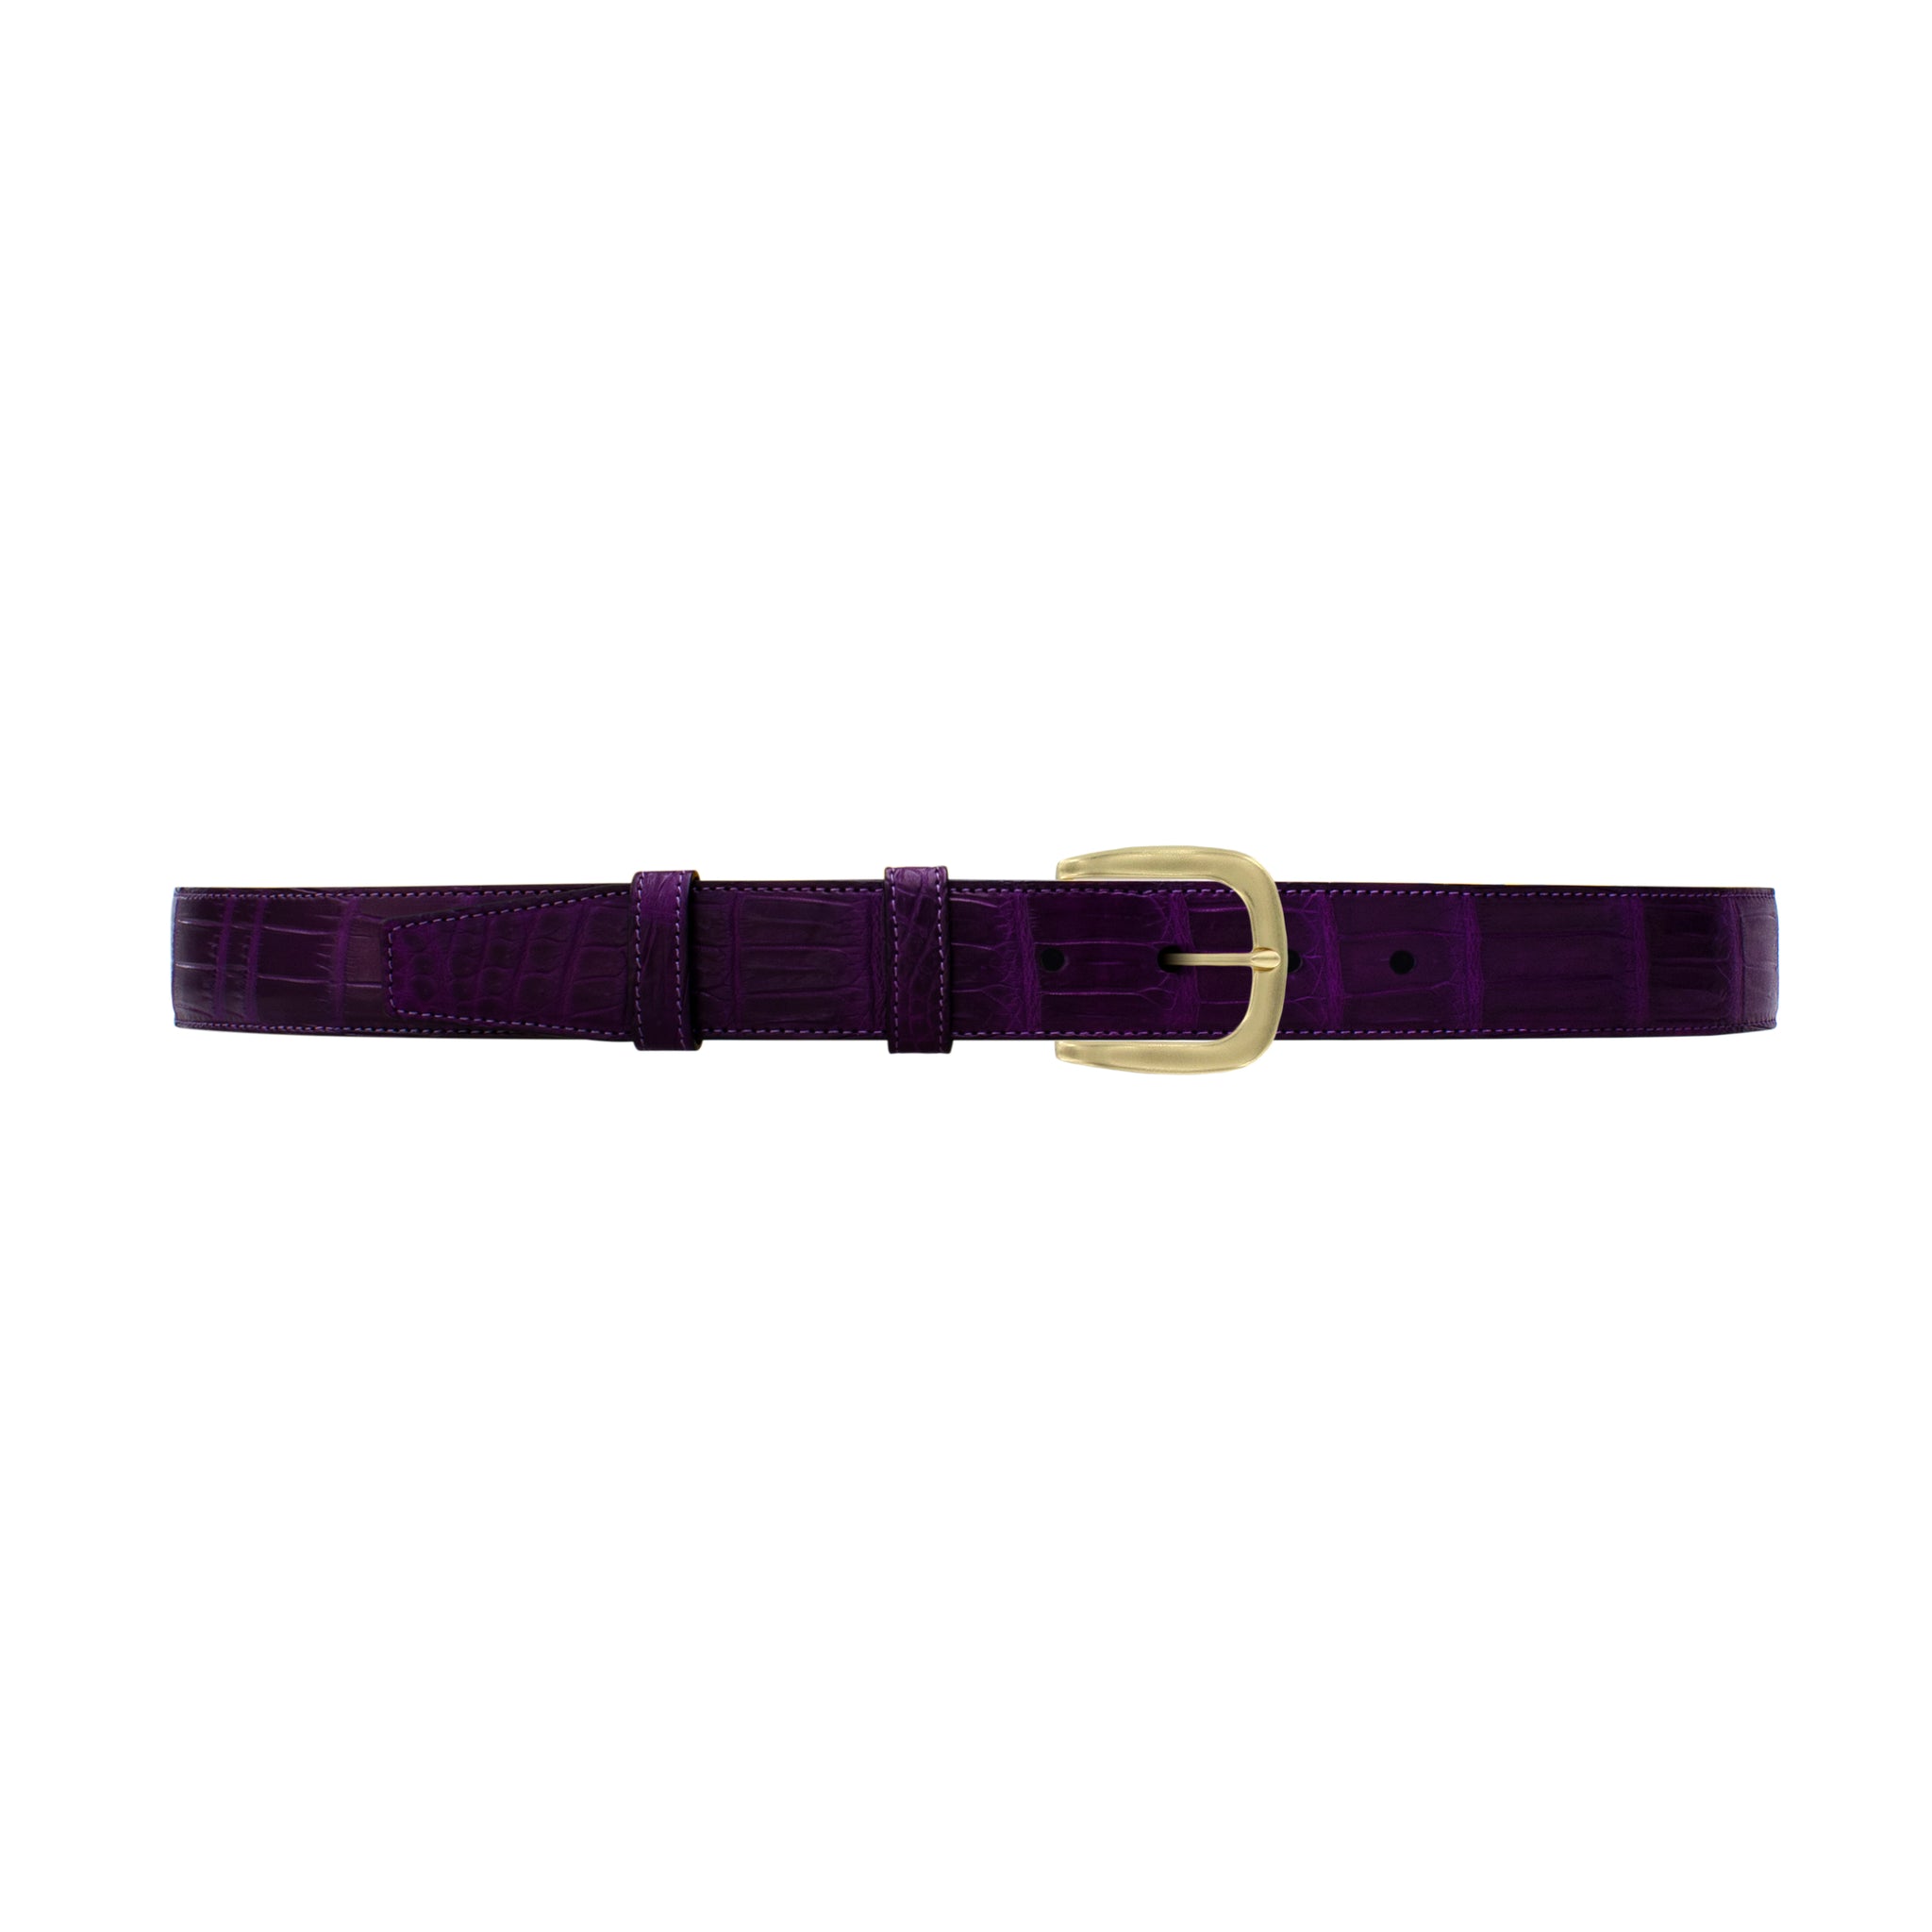 1 1/4" Violet Classic Belt with Oxford Cocktail Buckle in Brass